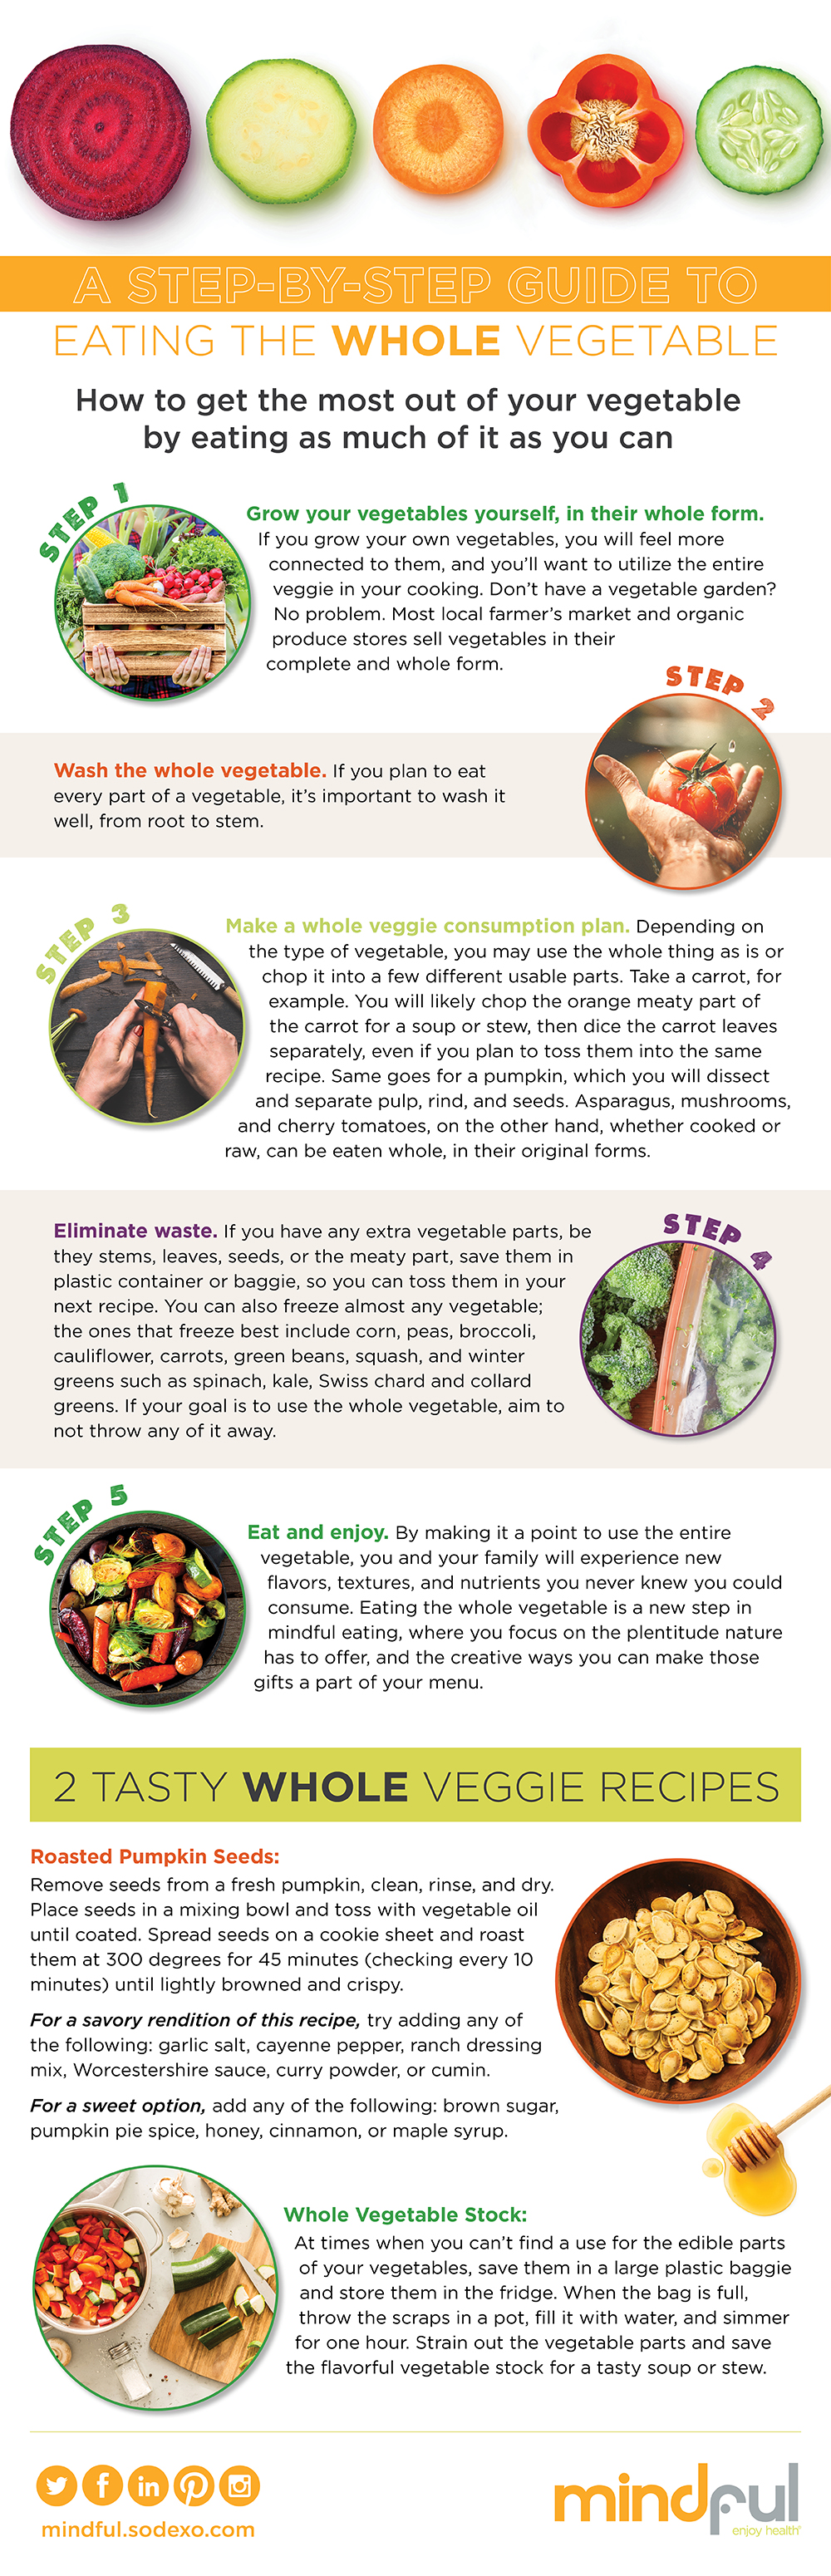 A Step-by-Step Guide to Eating the Whole Vegetable - Mindful by Sodexo